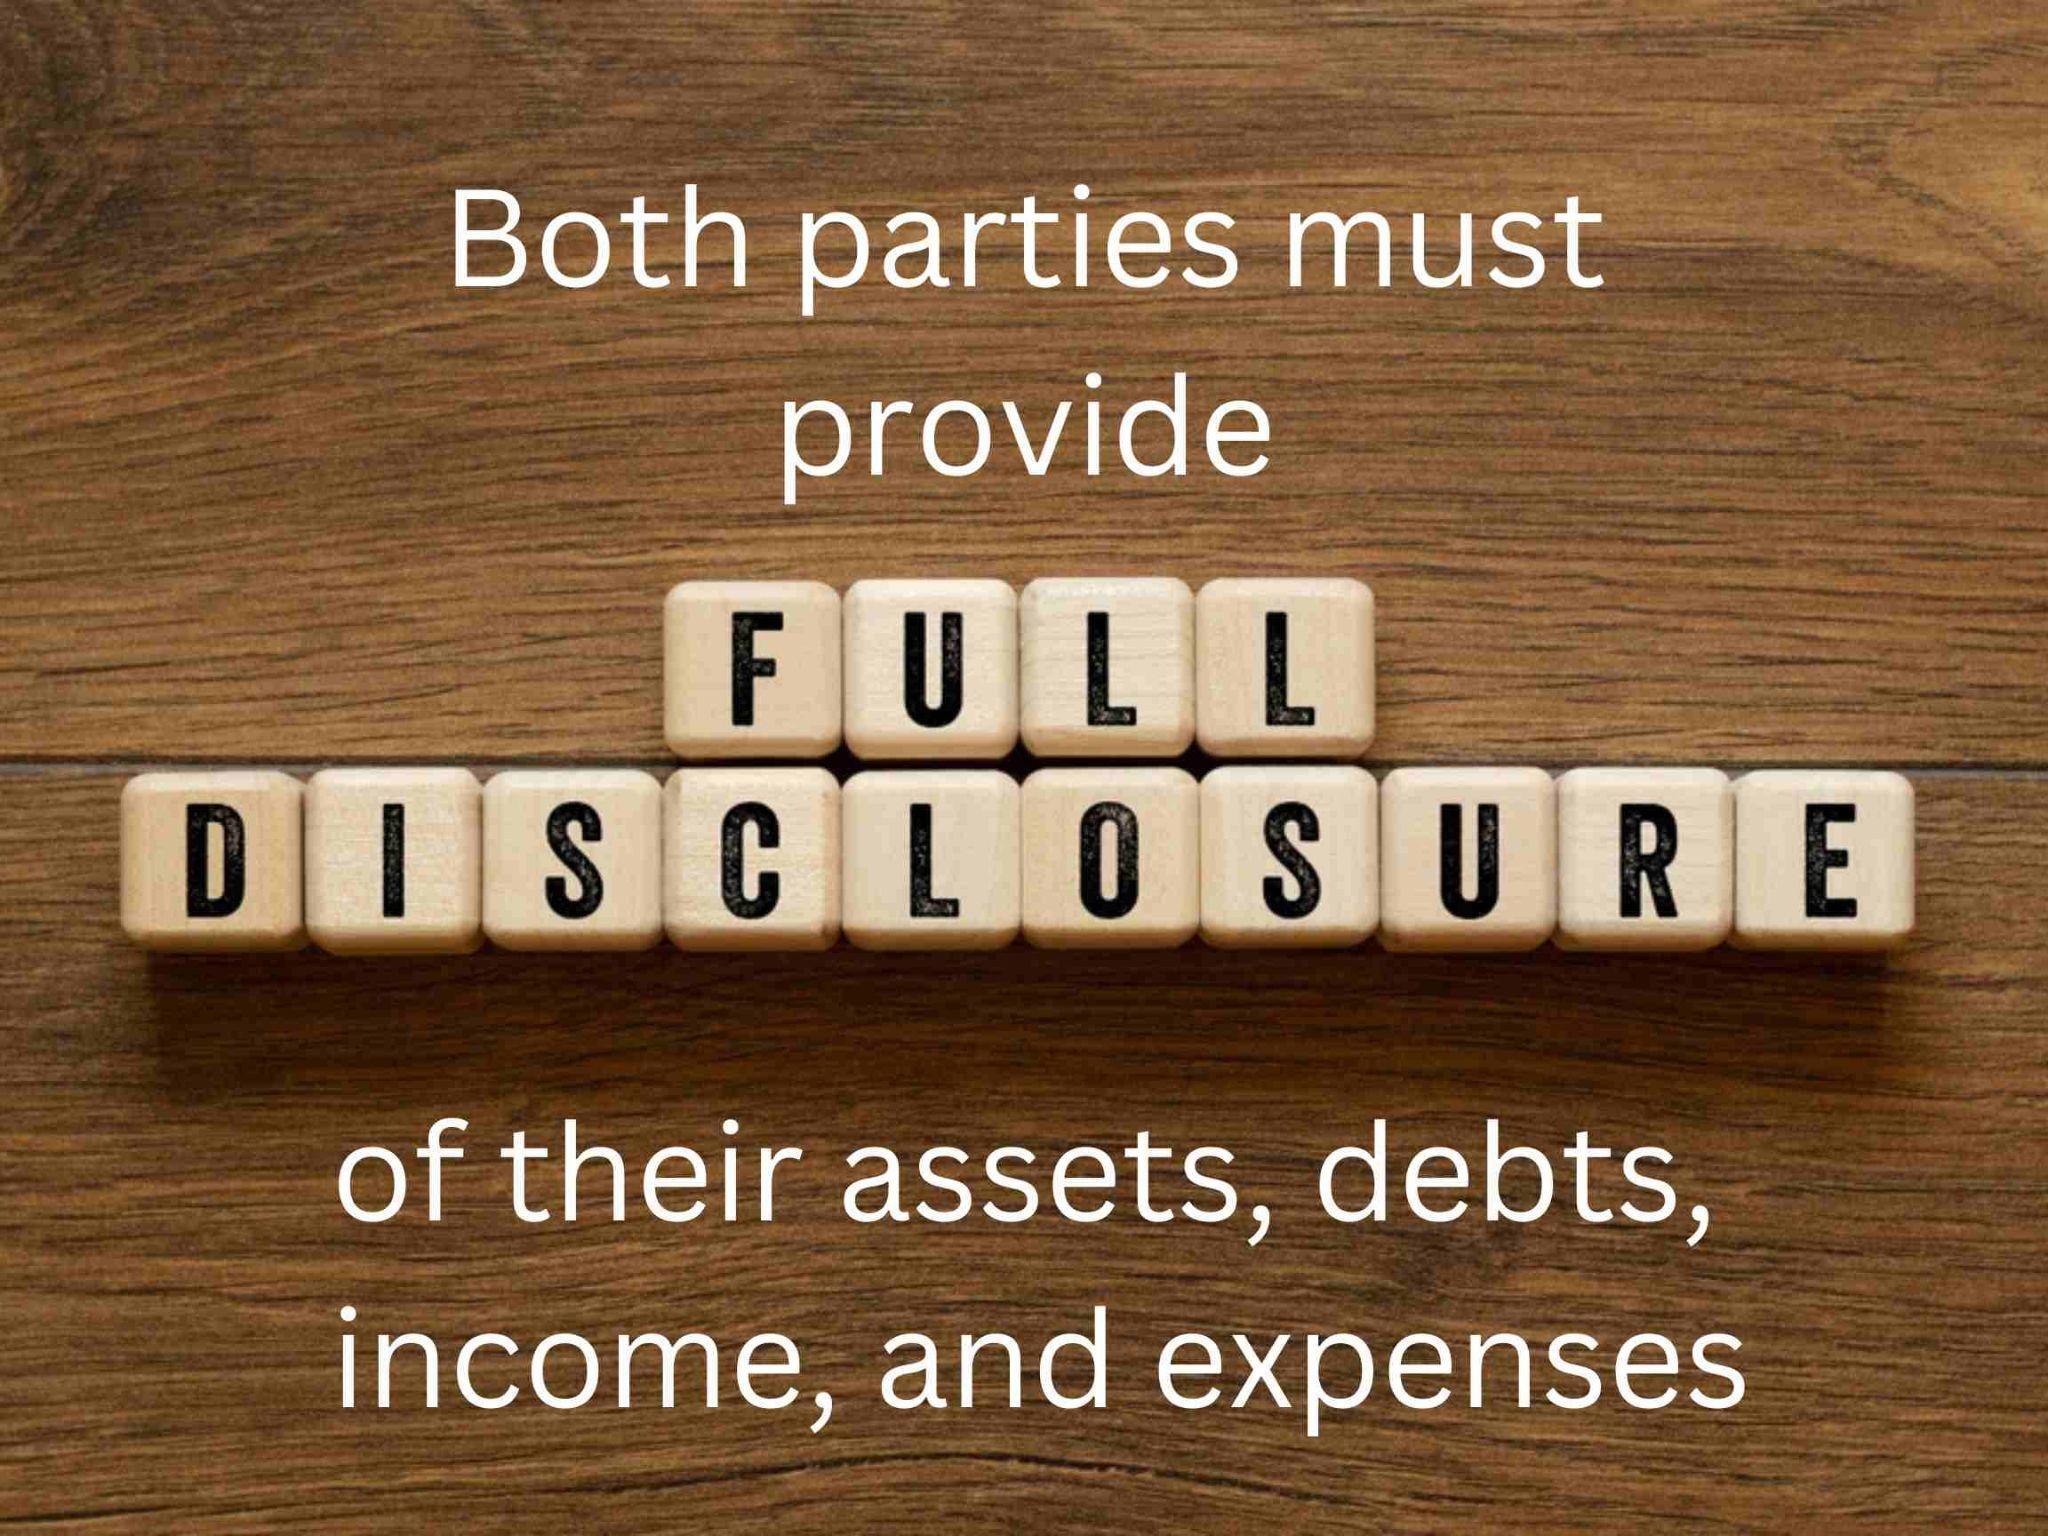 Scrabble tiles spell out "FULL DISCLOSURE" with the text "Both parties must provide full disclosure of their assets, debts, income, and expenses" on a wooden background – an essential step in a peaceful path through divorce mediation.